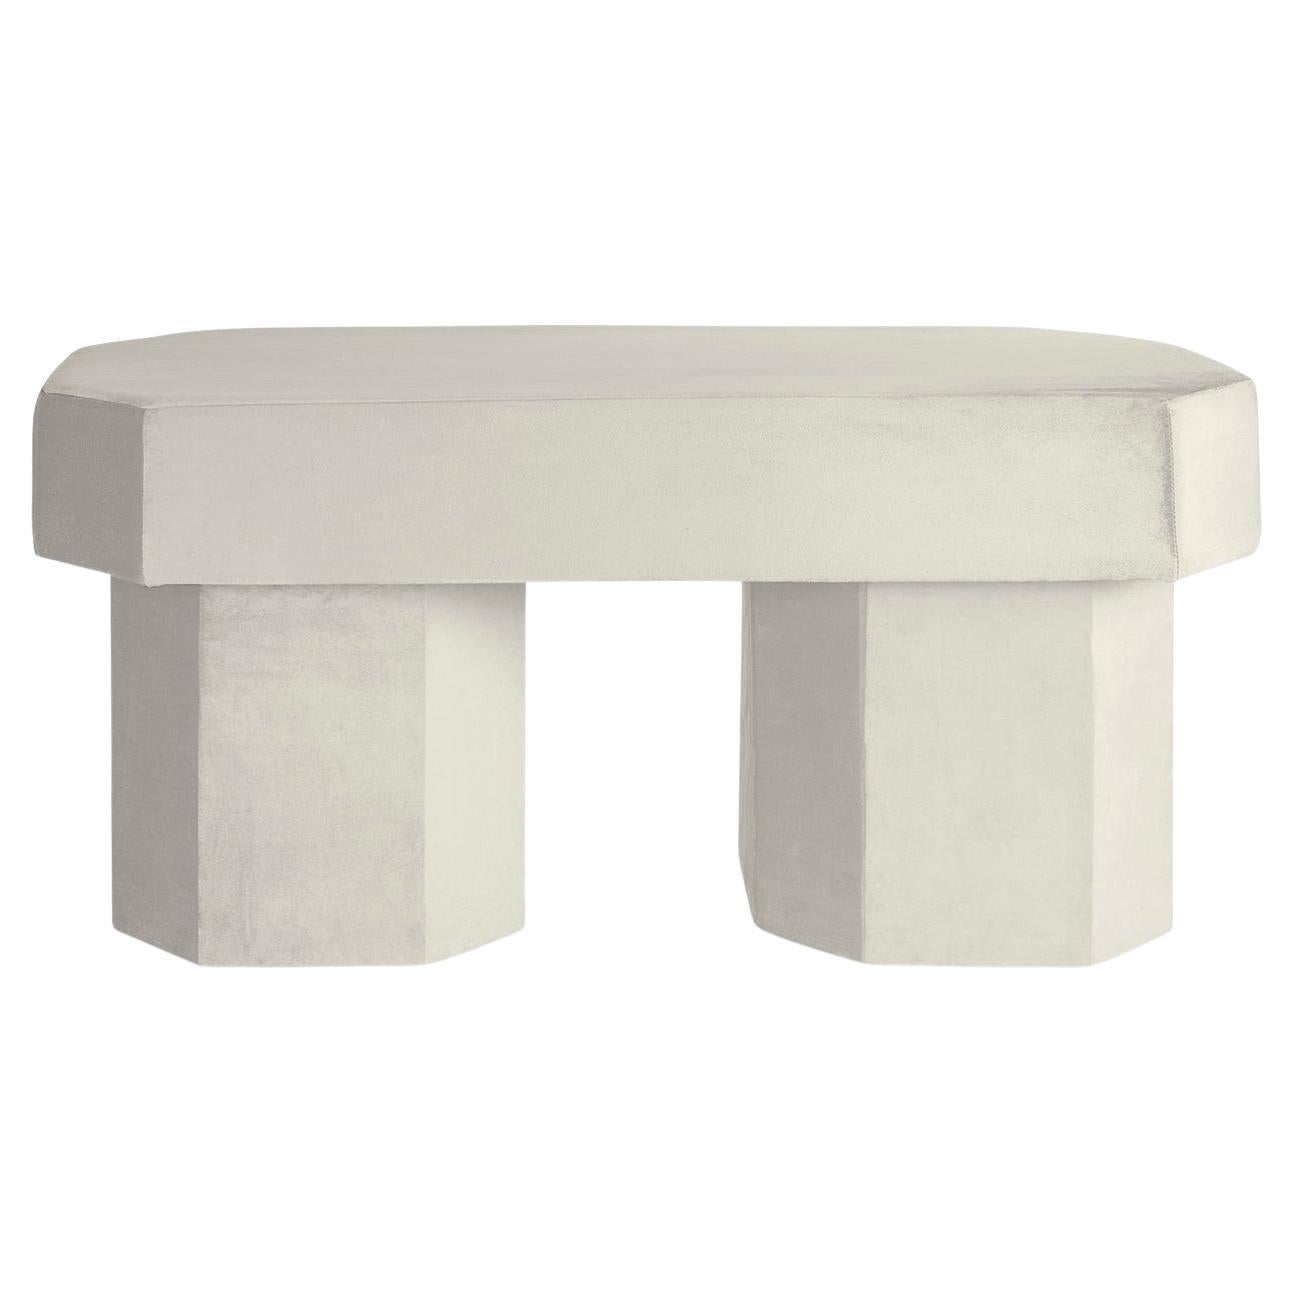 Viva White Bench by Houtique